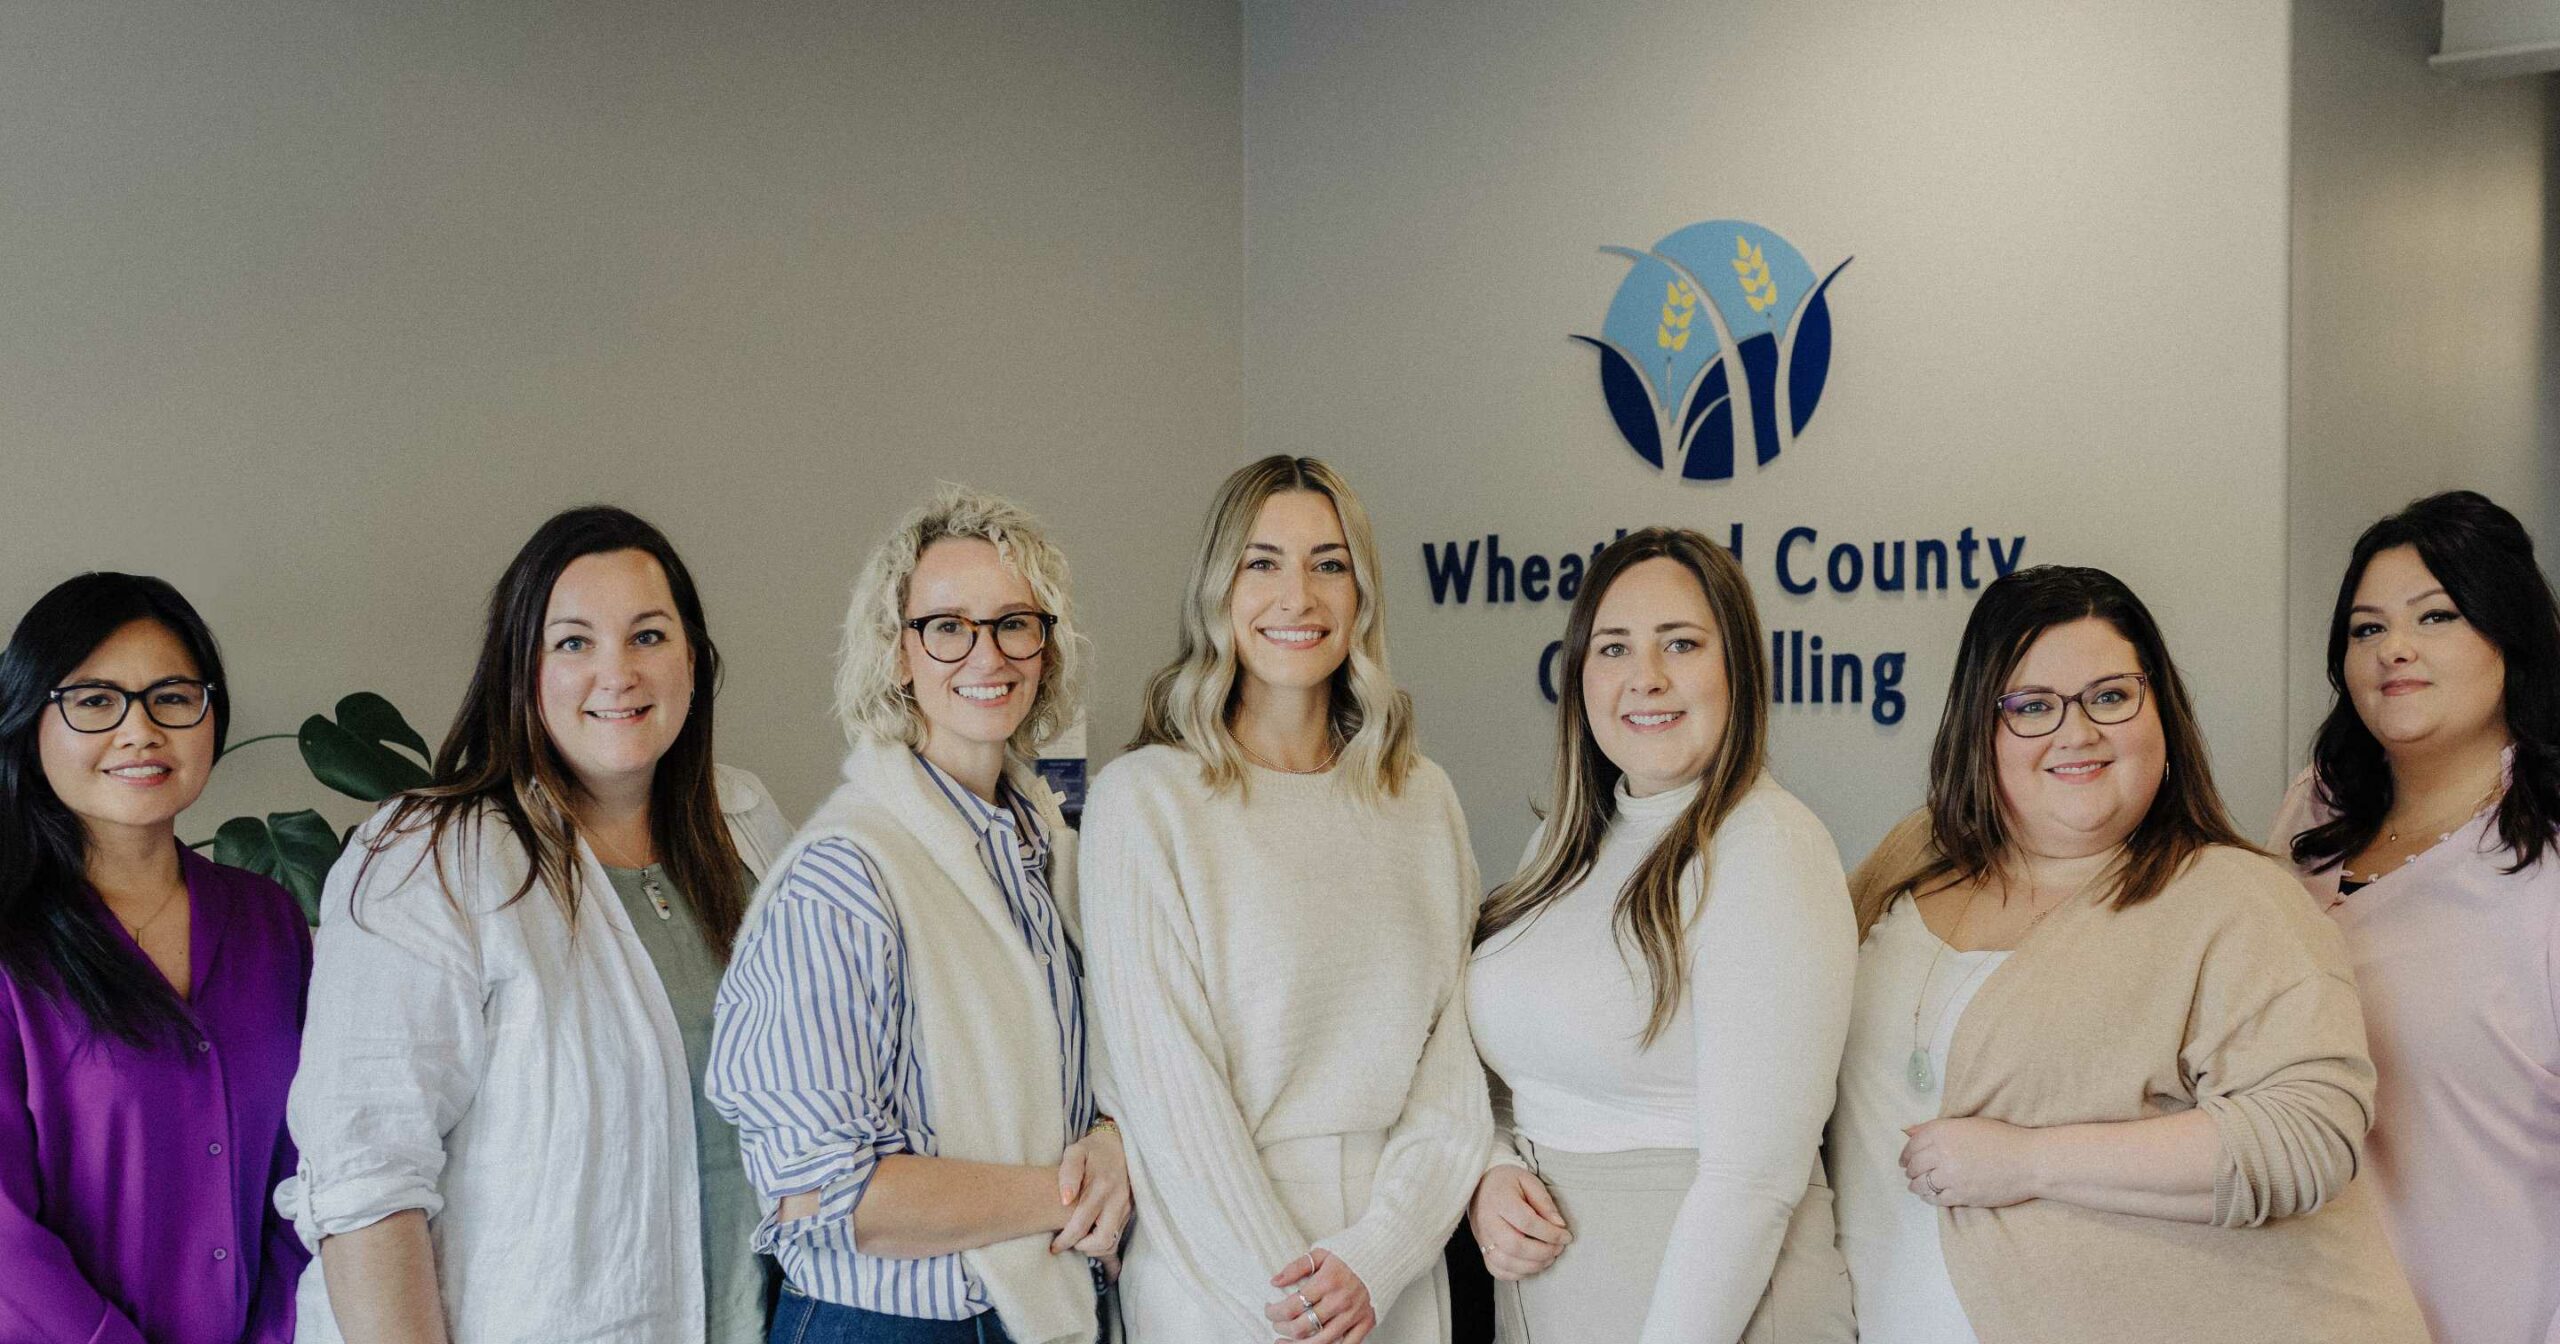 A group of women posing in front of a sign that says wilmington county counseling.